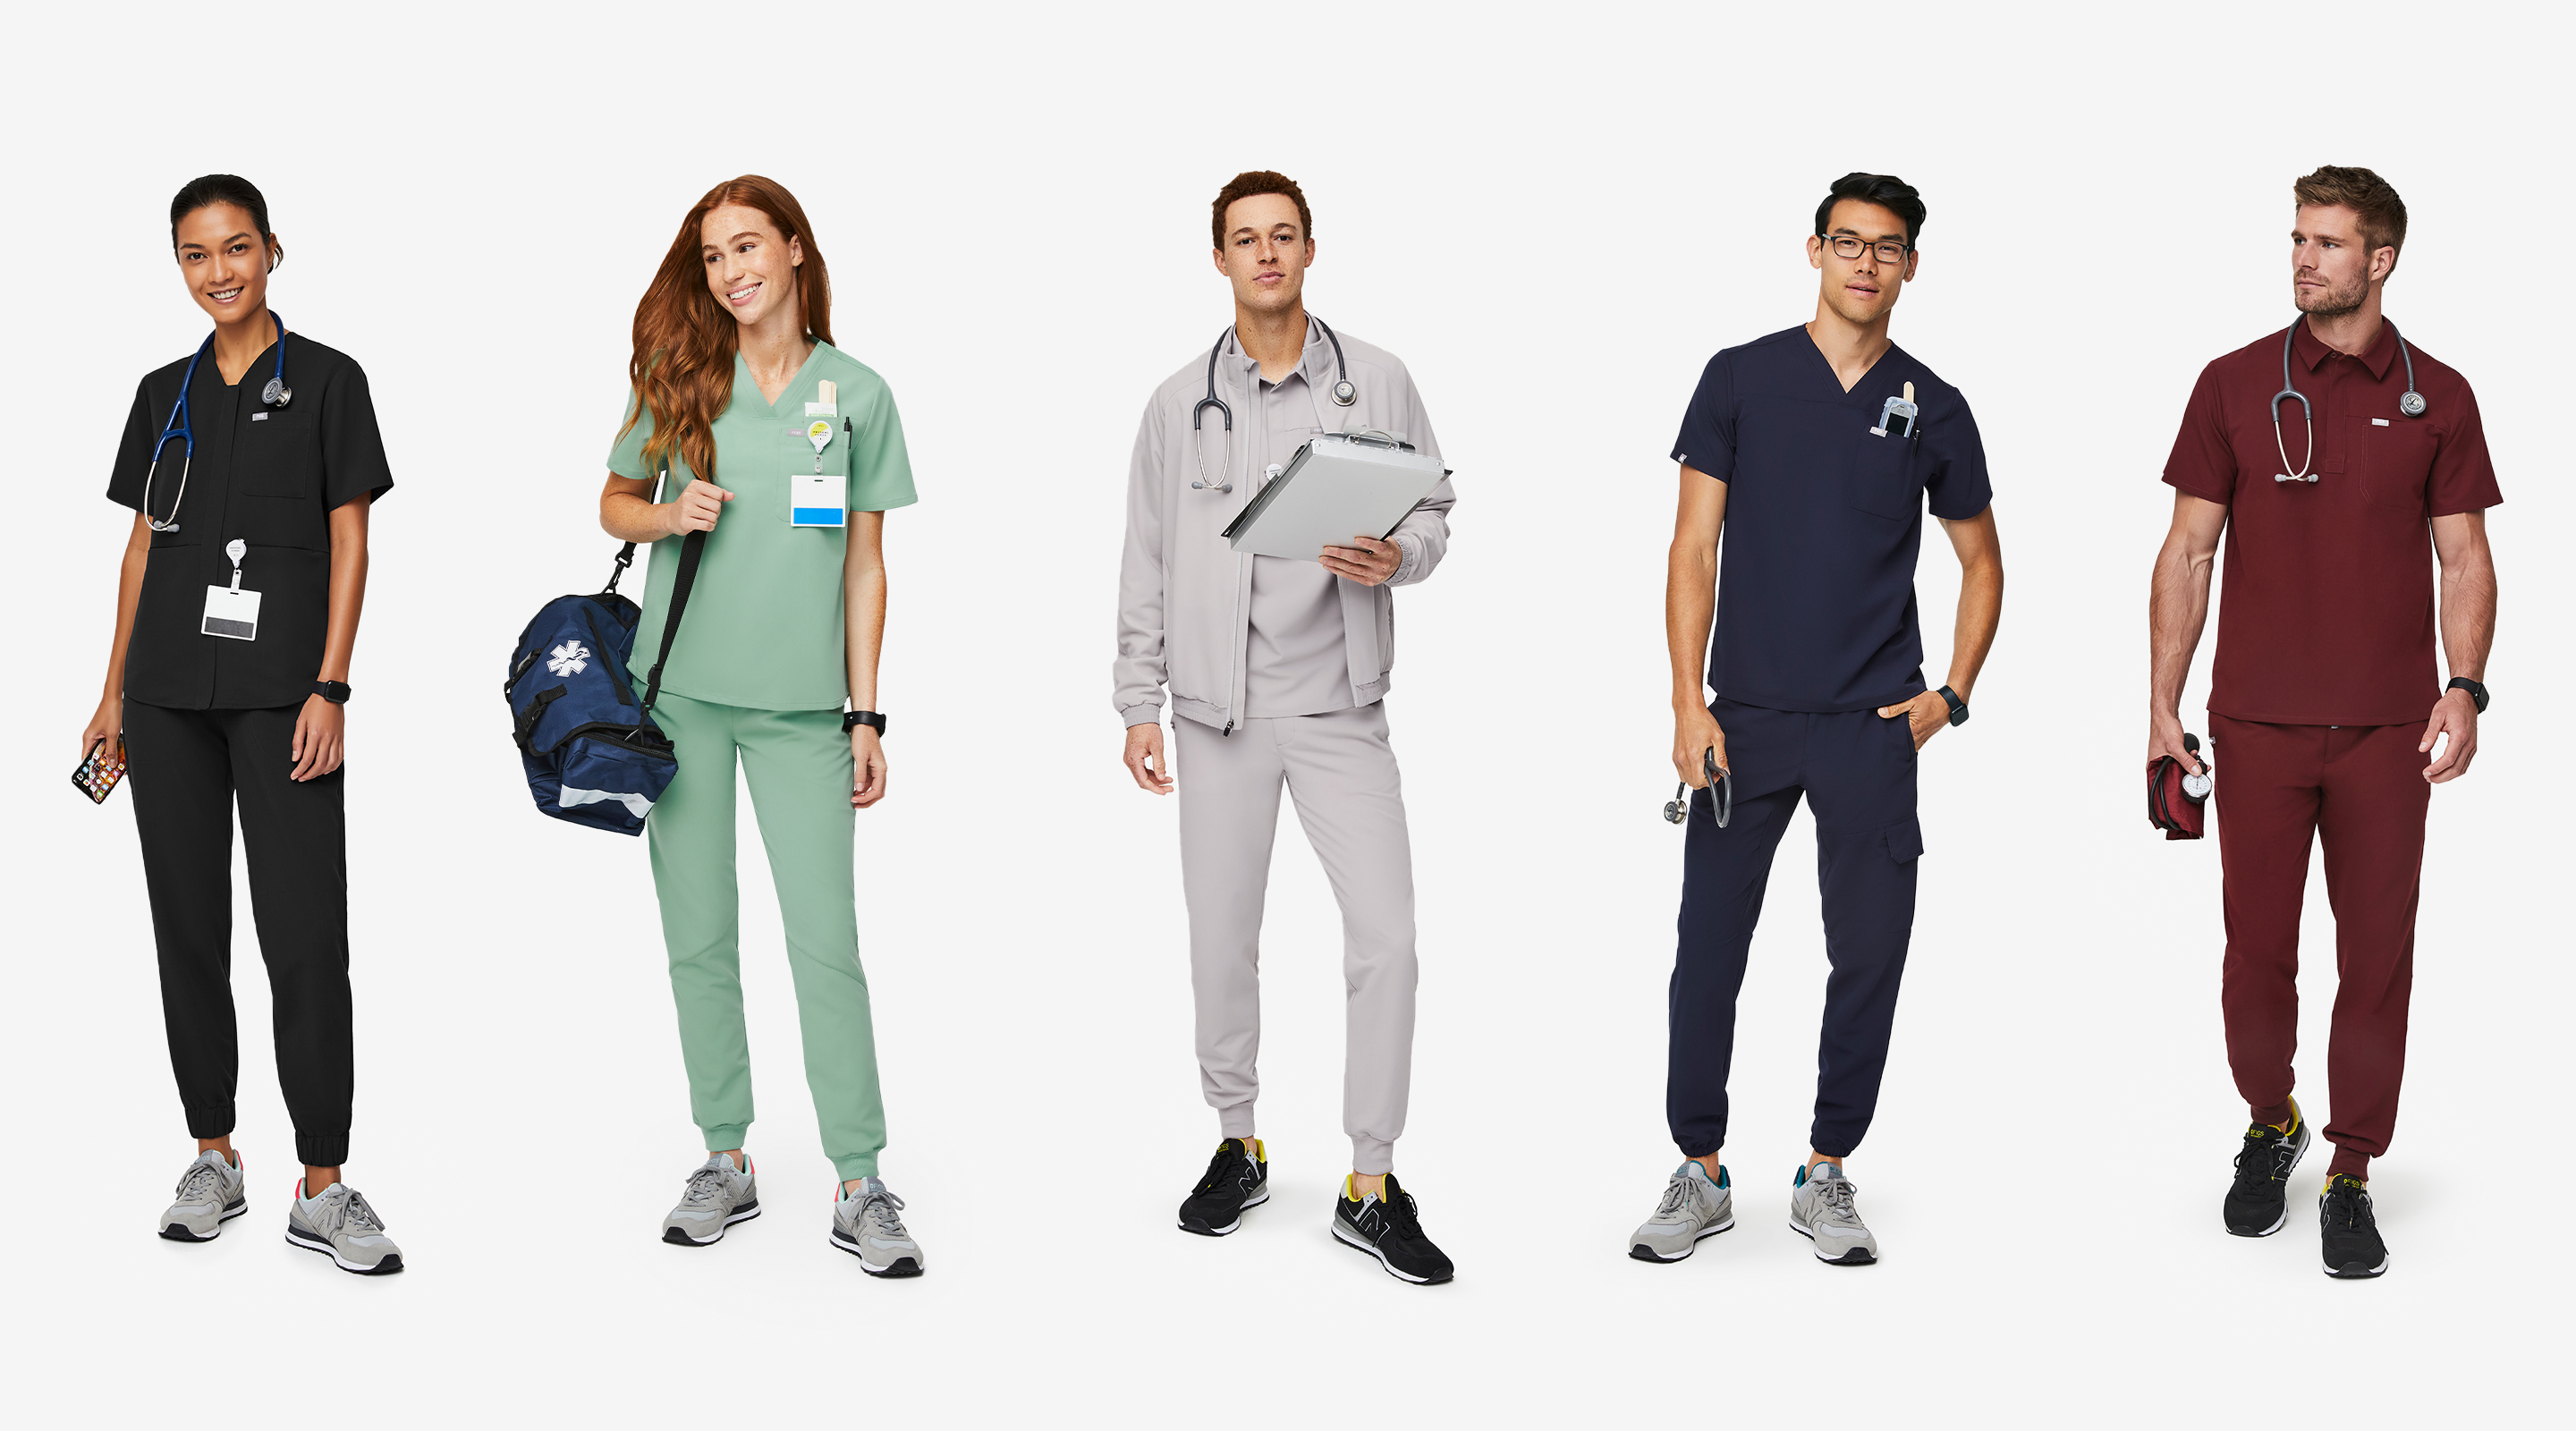 FIGS Scrubs Official Site - Medical Uniforms & Apparel